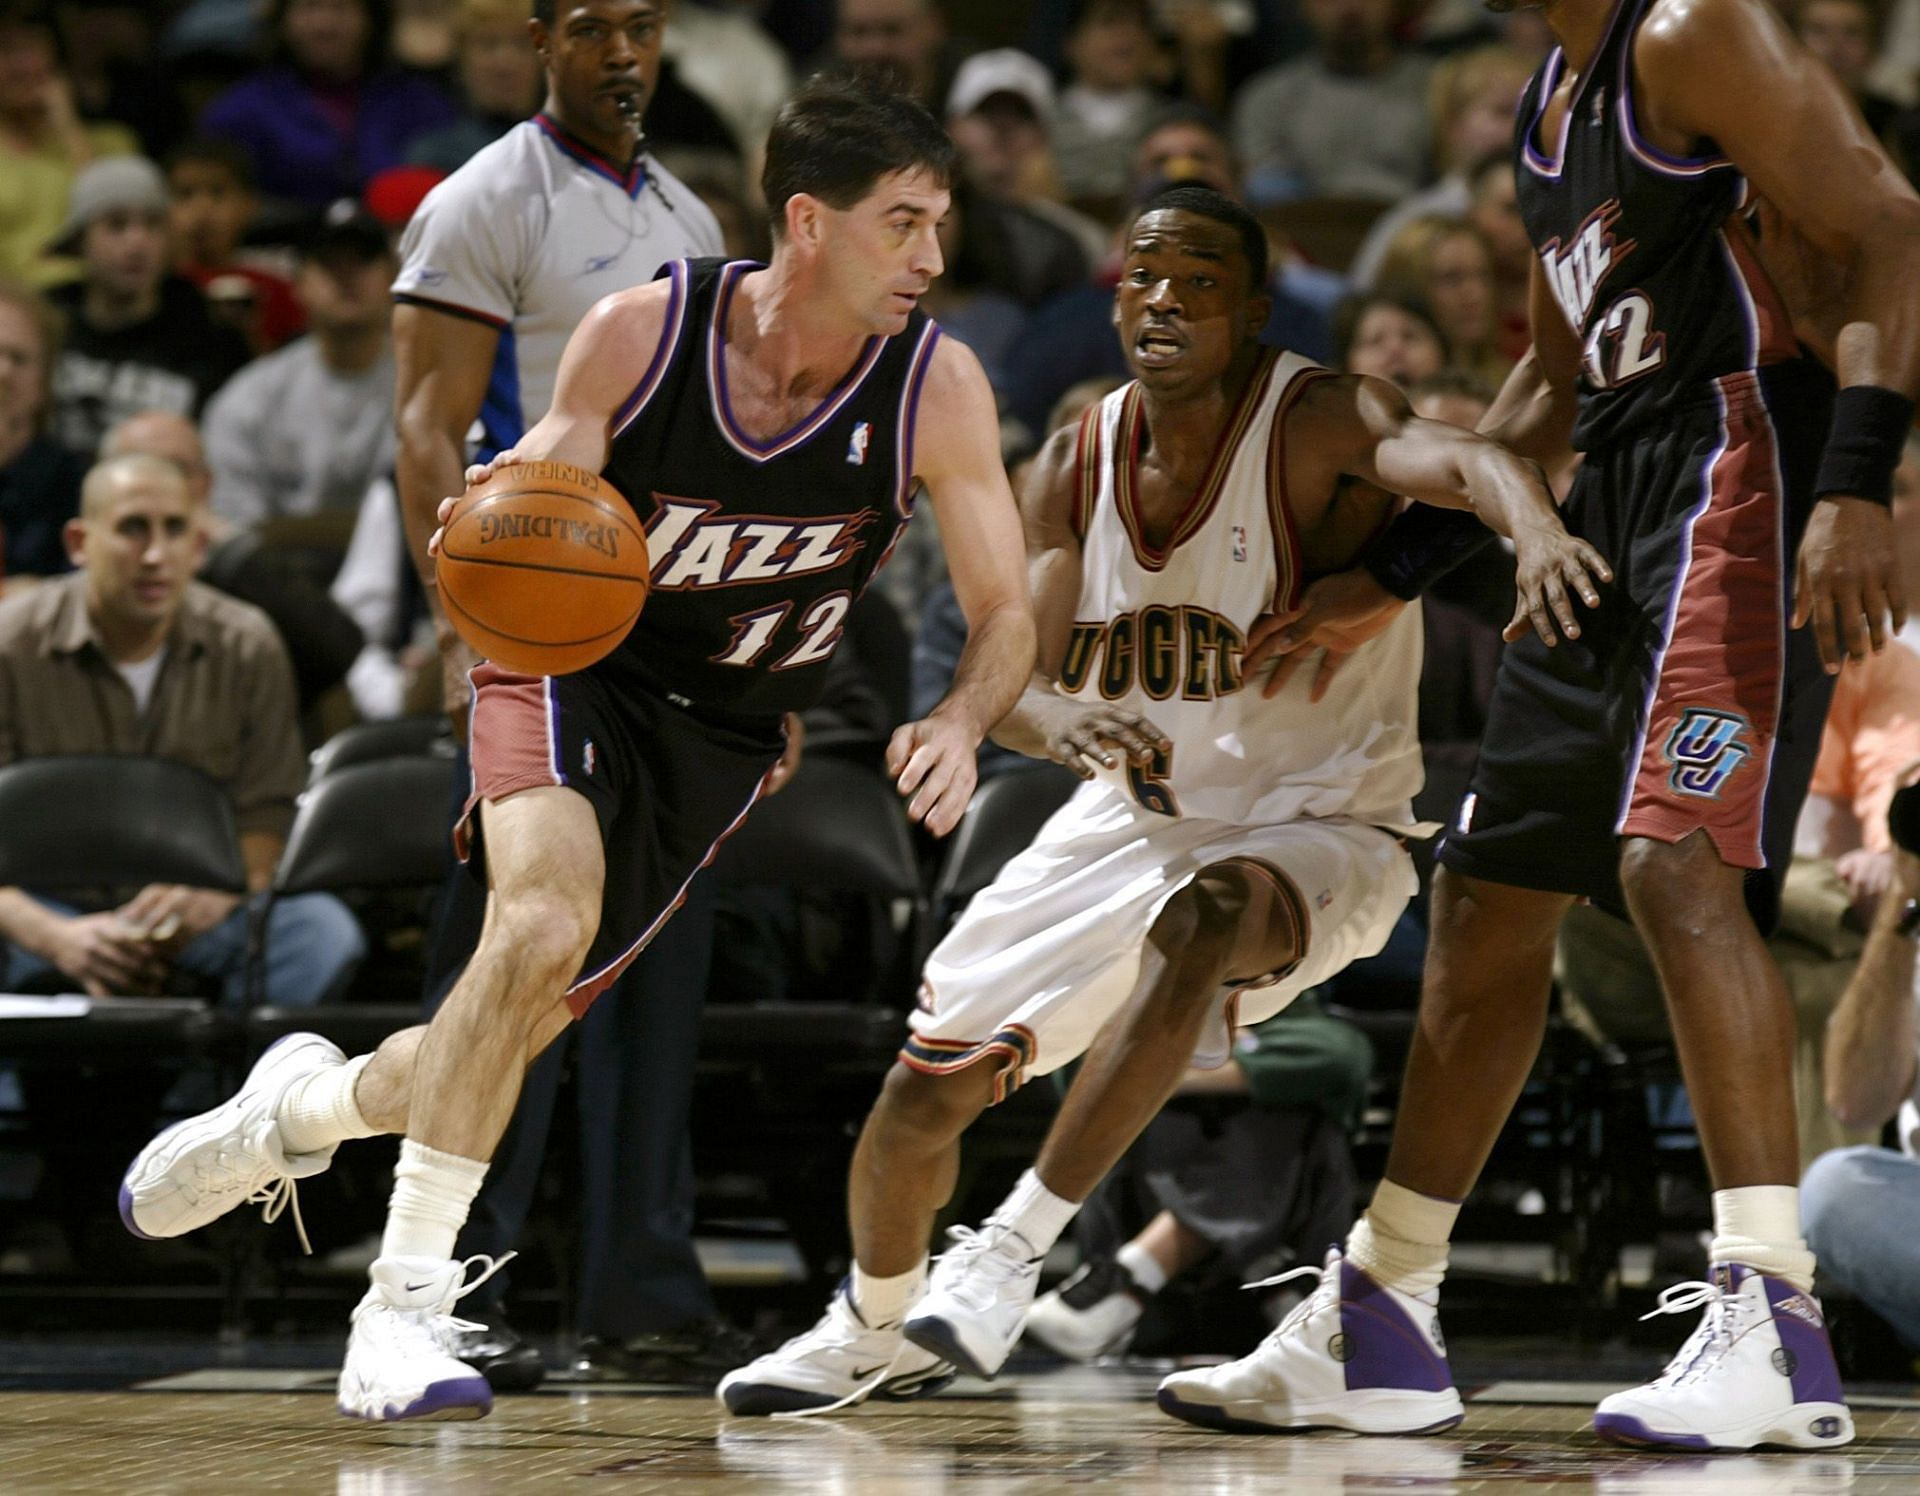 John Stockton is one of the oldest players in the NBA history